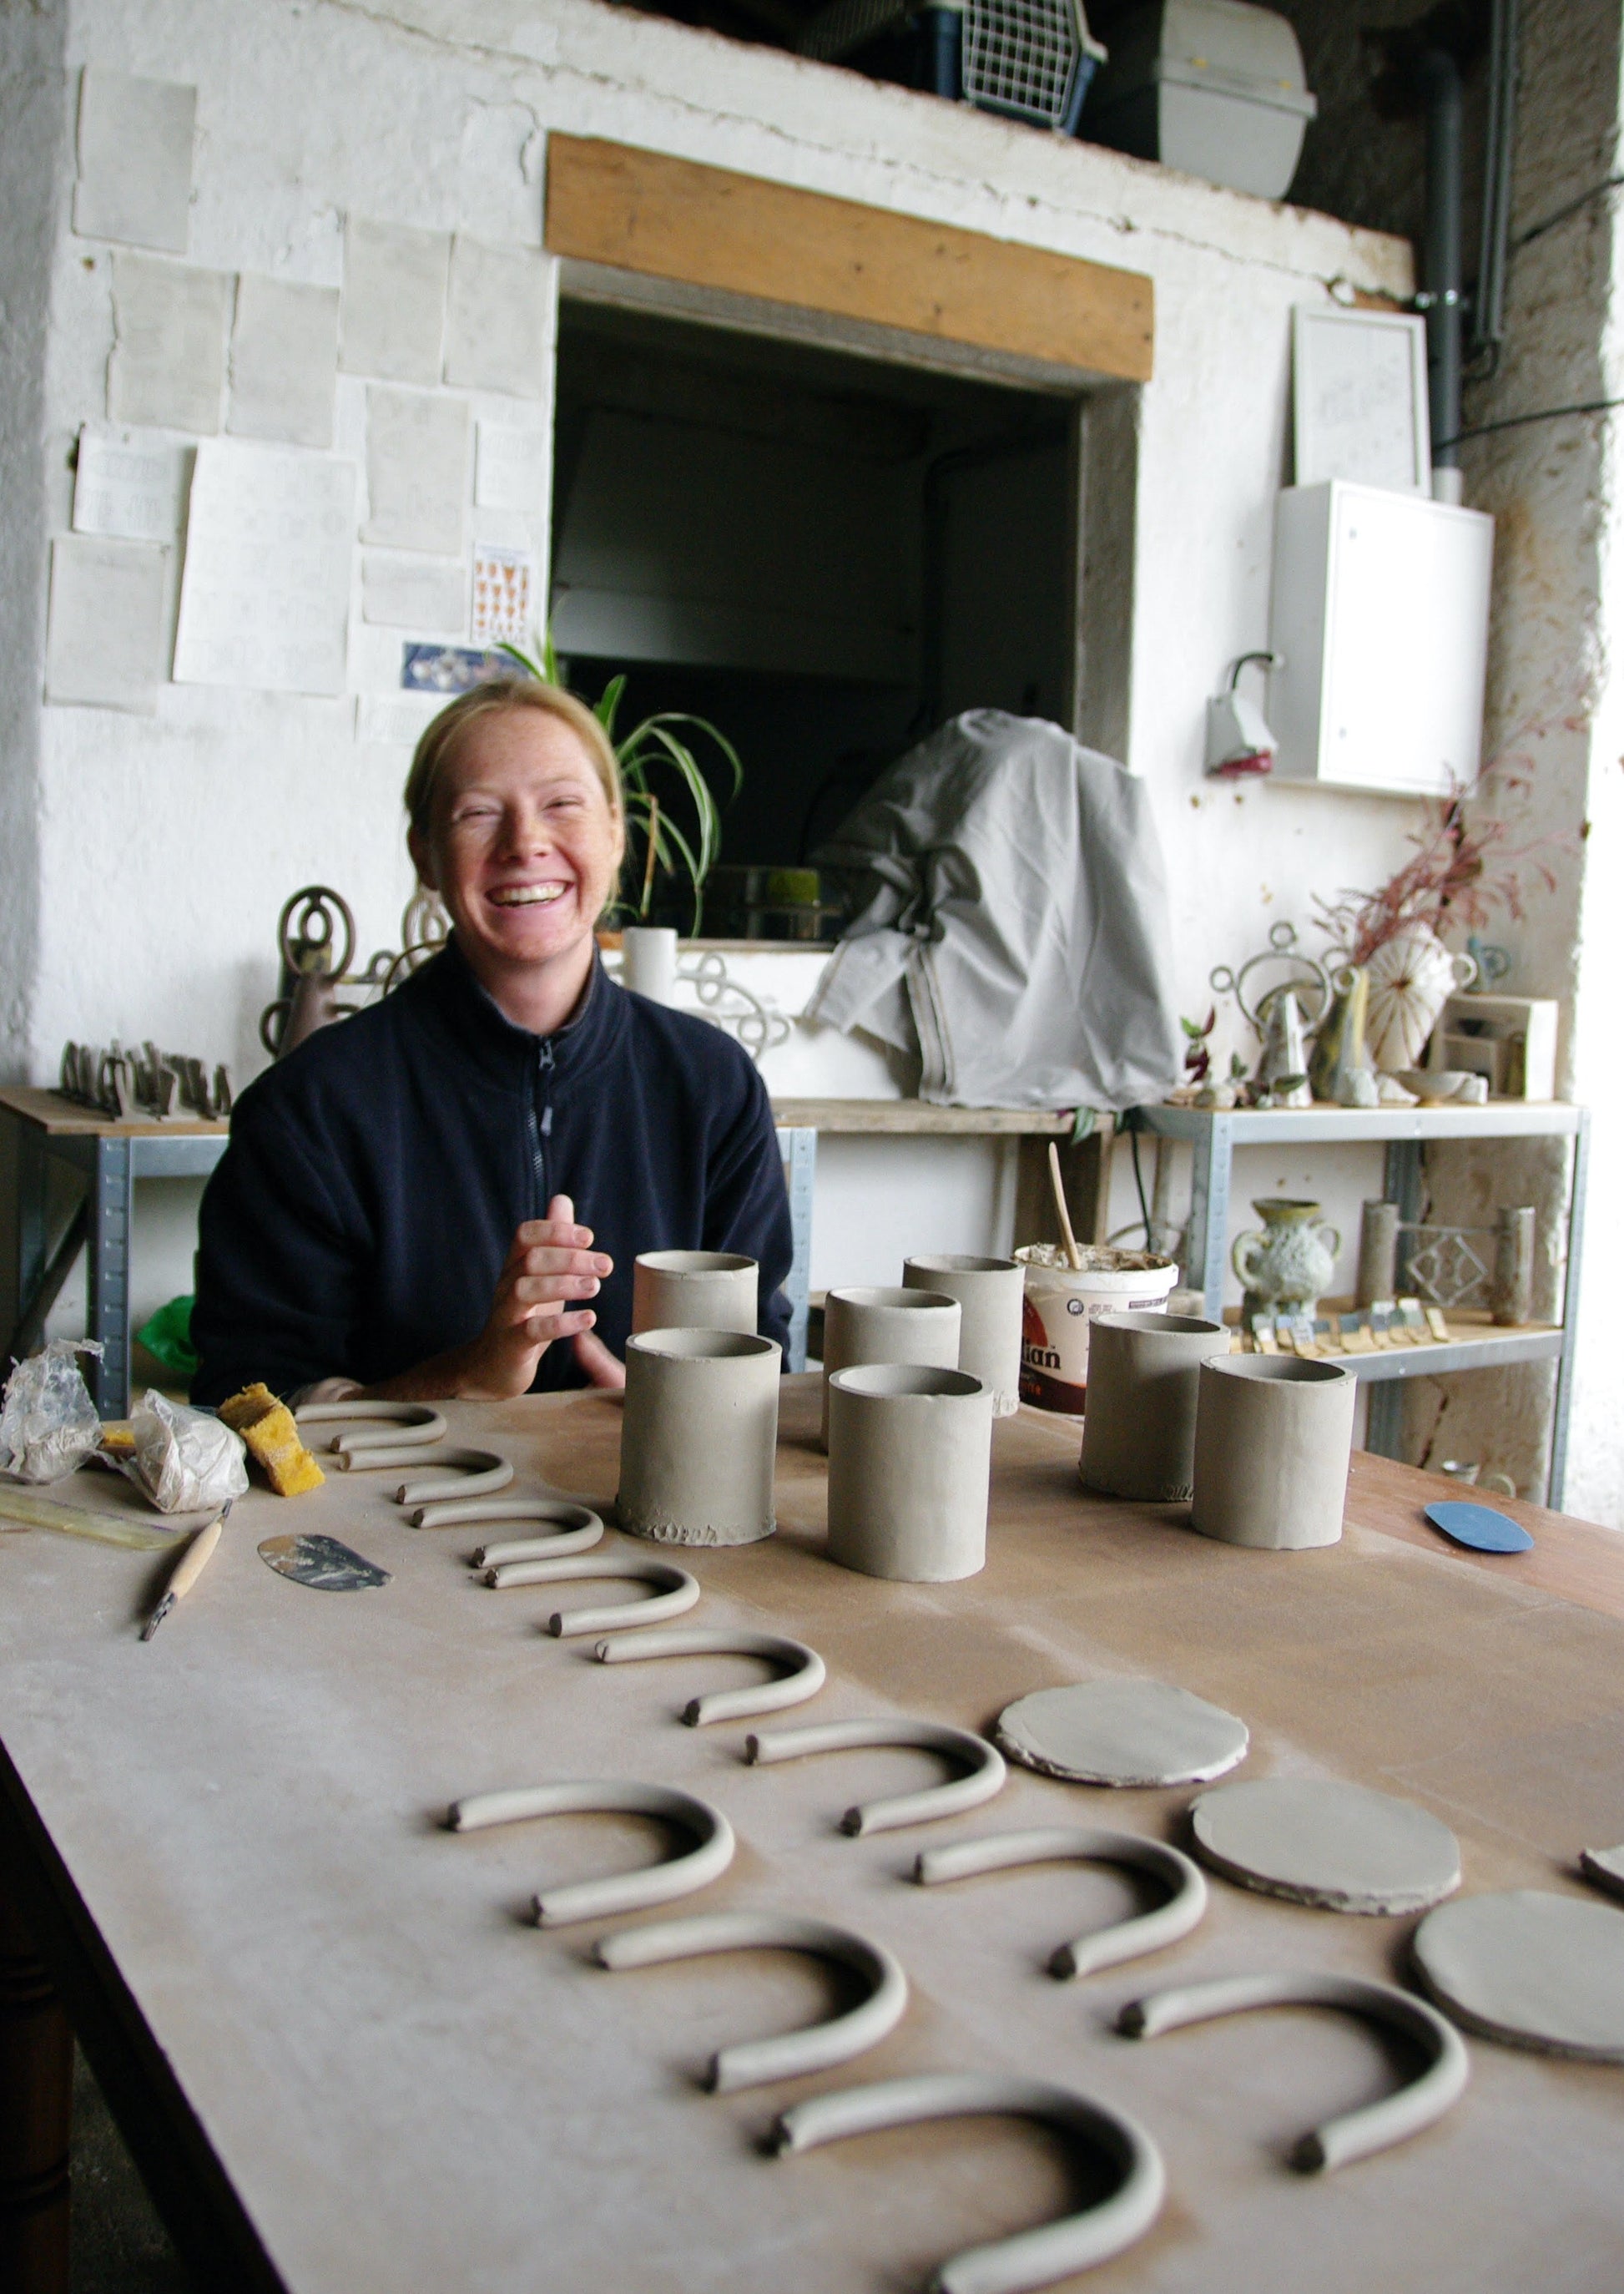 "Discovering Ceramics" Workshop with Daisy in Tomar, Portugal